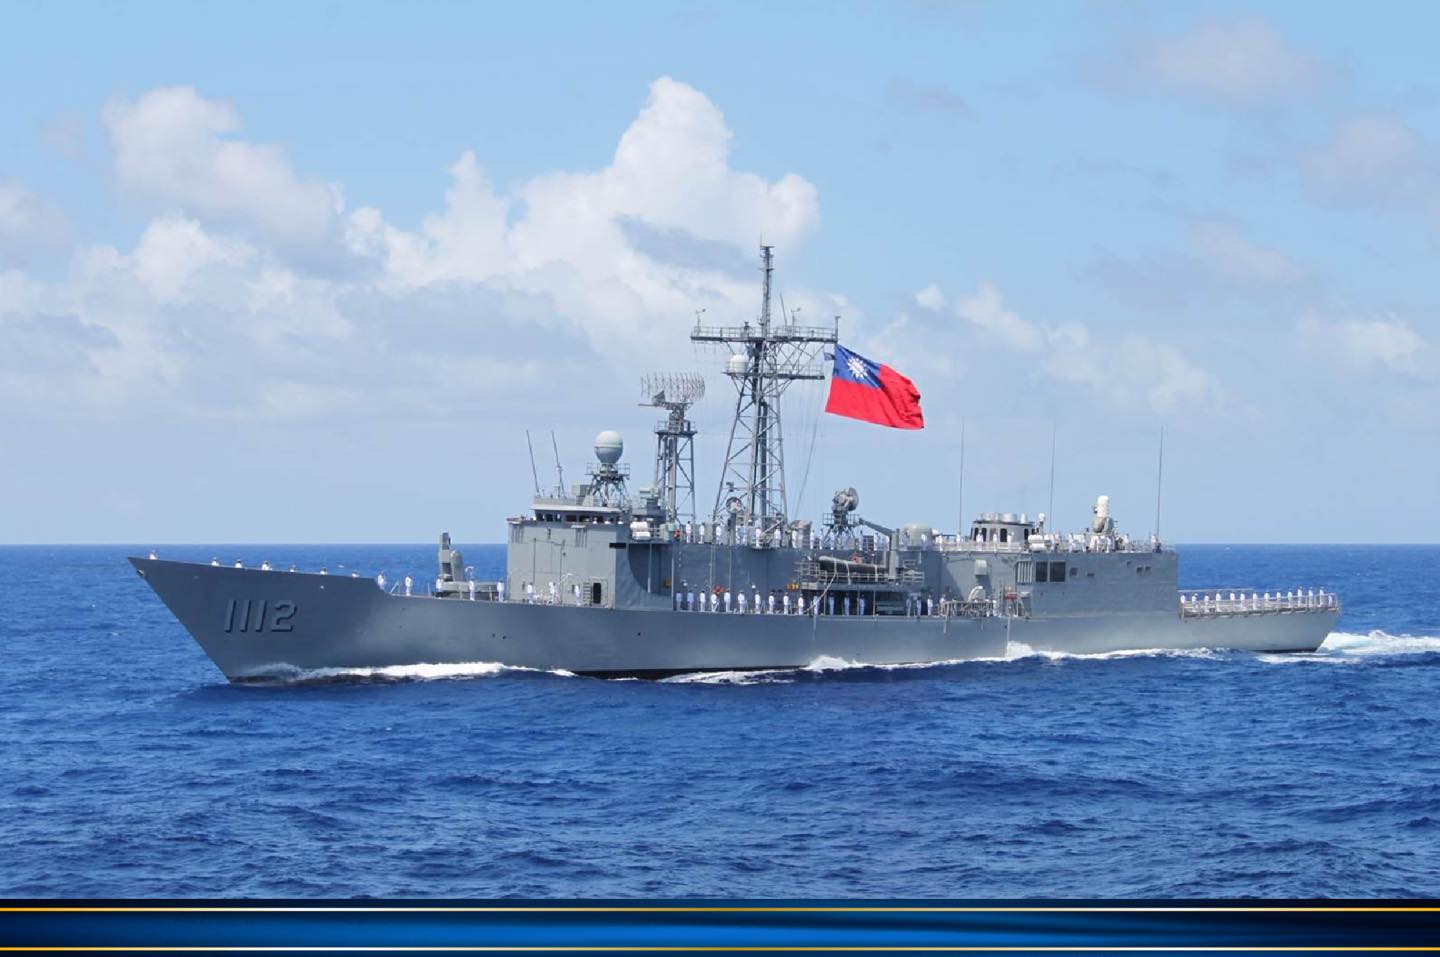 Taiwan S Navy Caught Between Two Strategies To Counter Chinese Threat Usni News